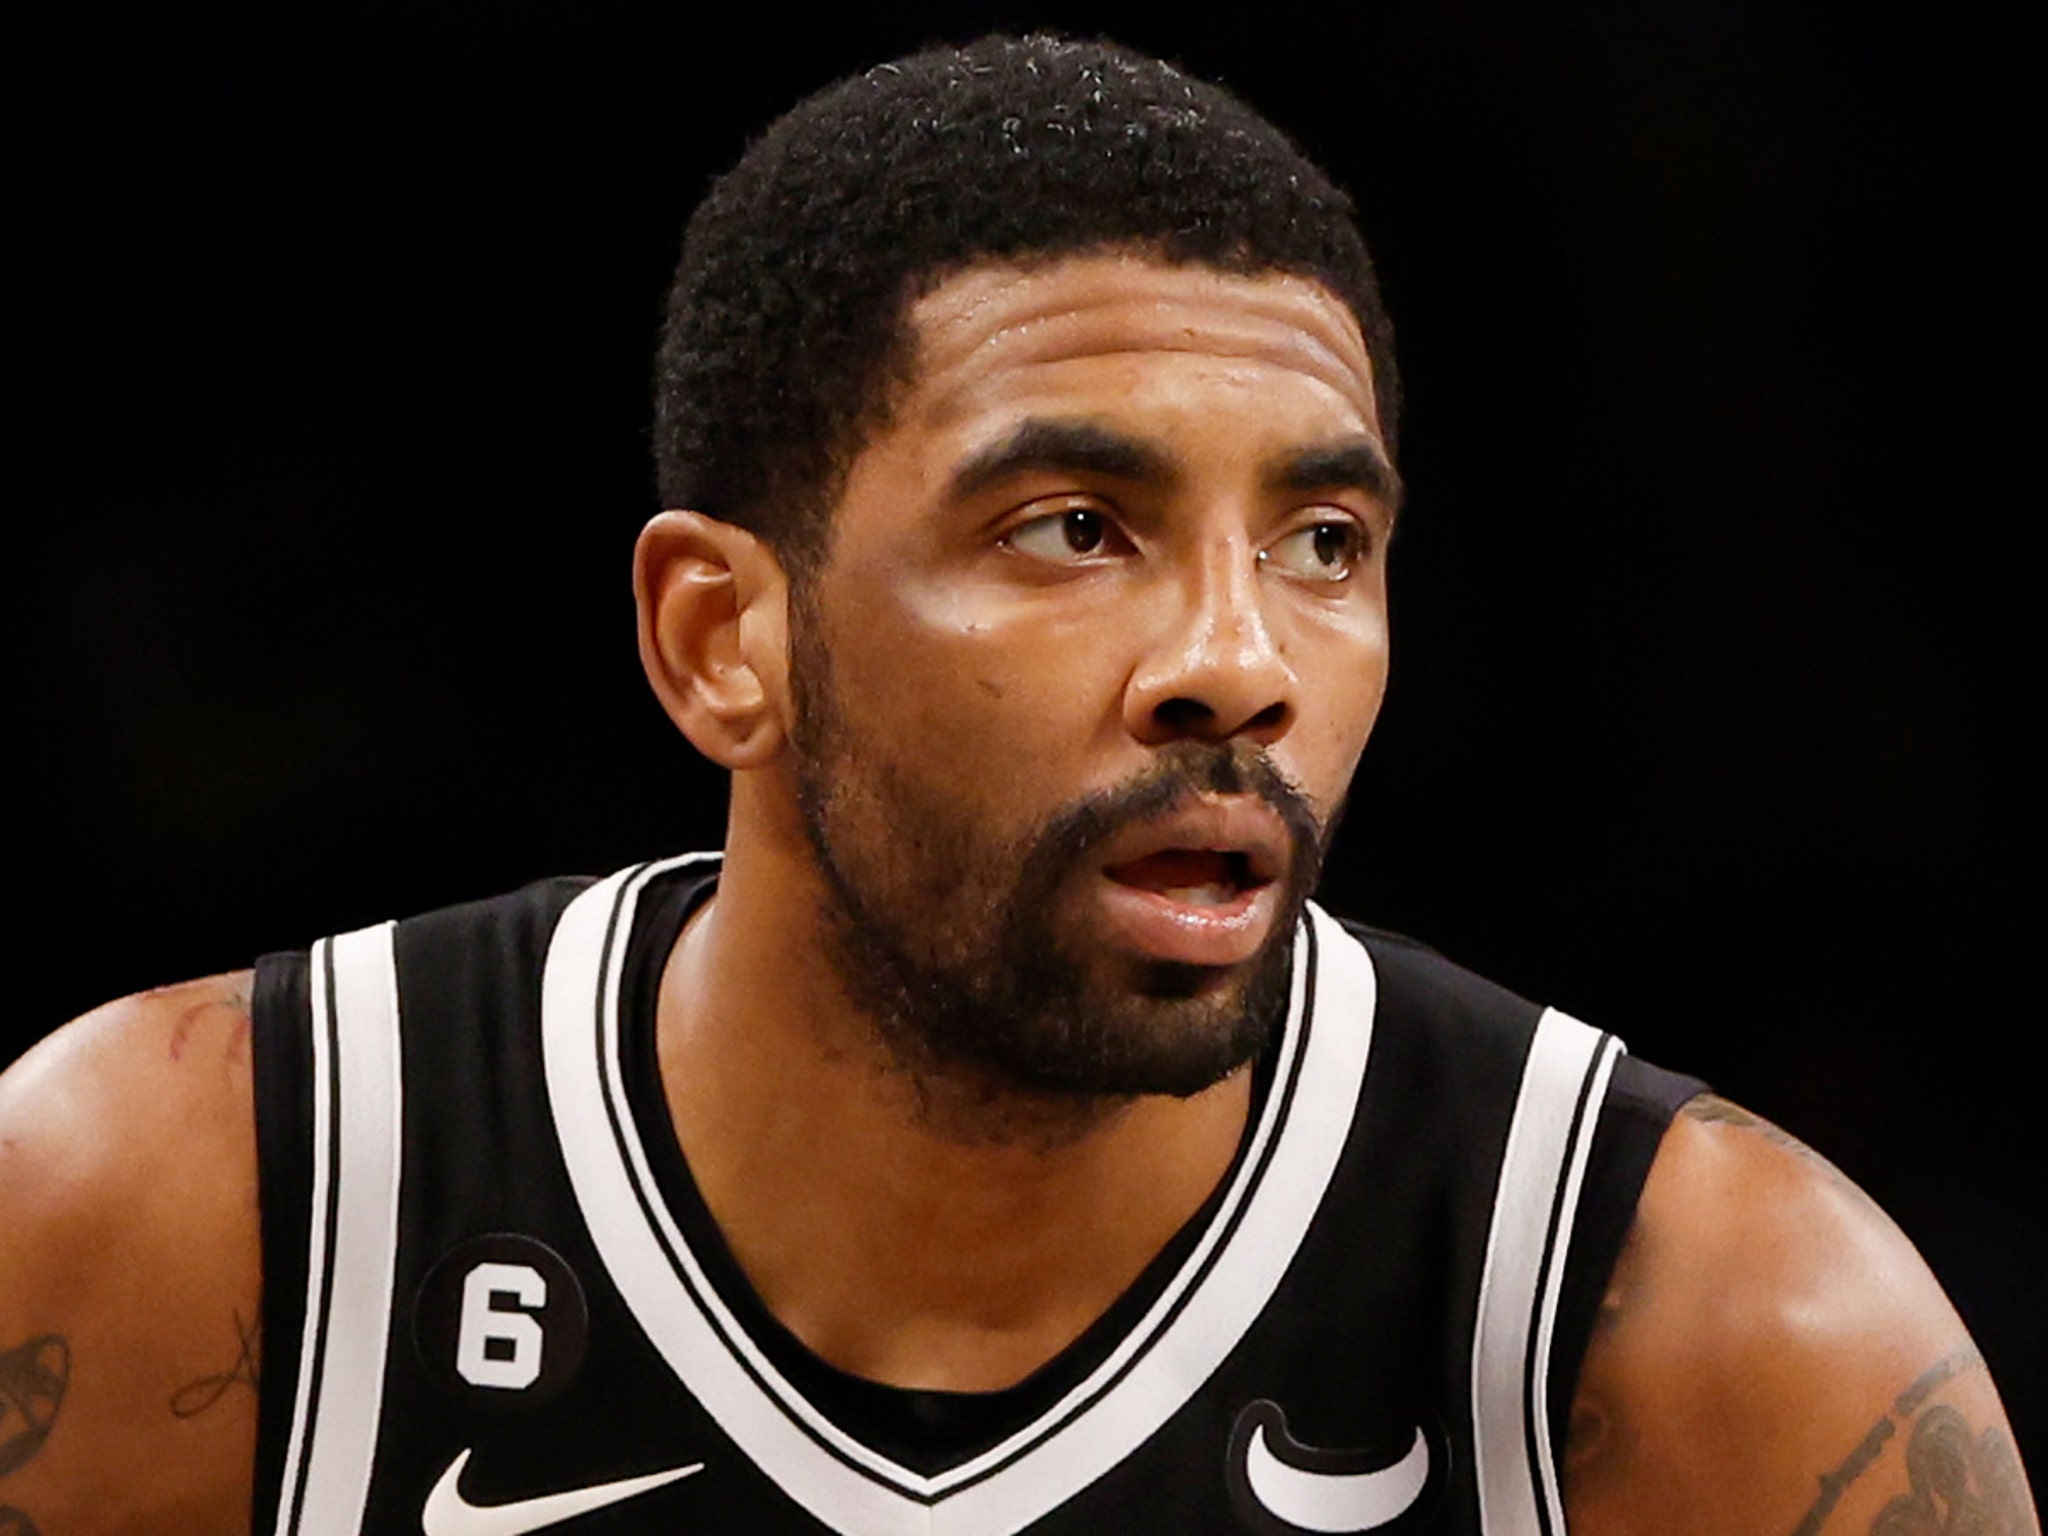 Kyrie Irving opts in to stay with Nets National News - Bally Sports